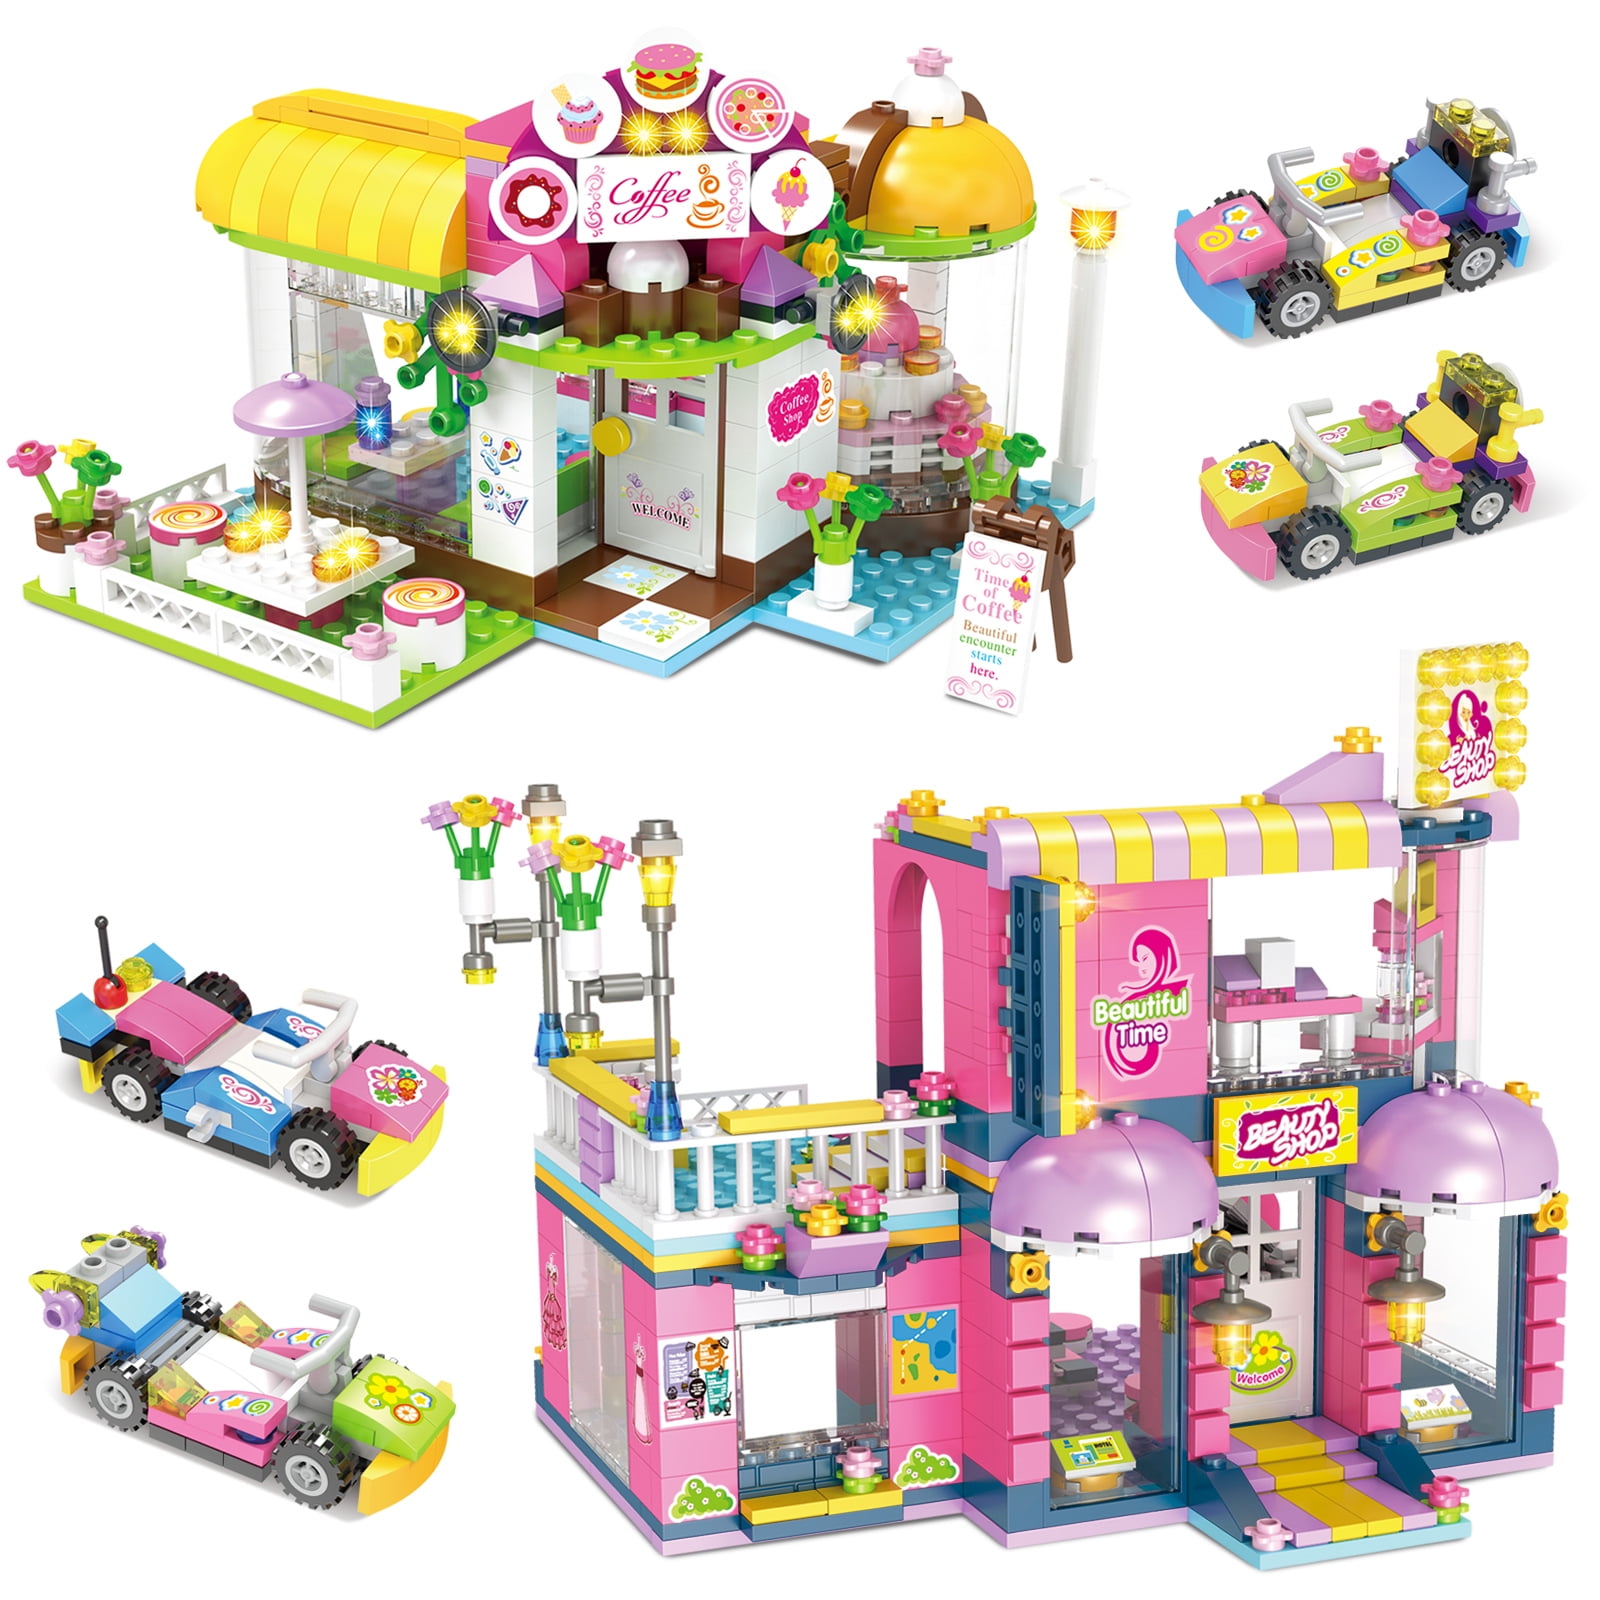 Exercise N Play Friends Coffee Coffee House & Hair Salon Building Blocks  Kit, Gifts for Boys Girls Ages 6 7 8 9 10 11 12 (1059 Pieces) 